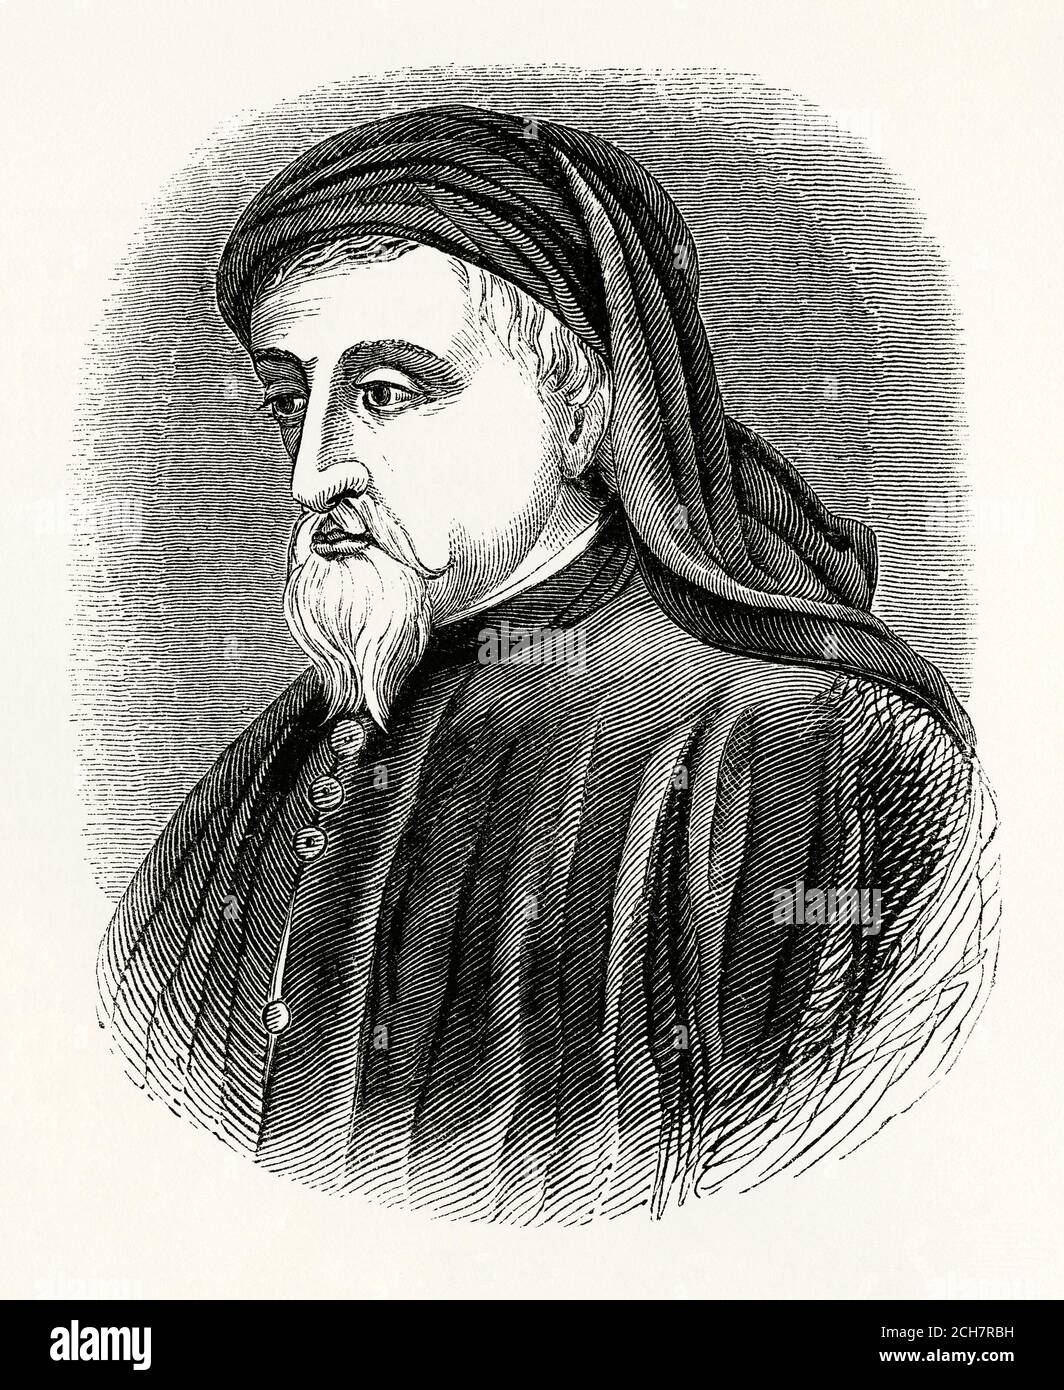 An old engraving of Geoffrey Chaucer (c. 1340s –1400). He was a poet and author, widely considered the greatest English writer of the middle ages and is best known for ‘The Canterbury Tales’. He was the first writer to be buried in what has since come to be called Poets' Corner in Westminster Abbey. Chaucer was also a philosopher and astronomer. He had a career in the civil service as a diplomat and was a member of parliament. He famously wrote in ‘Middle English’ at a time when the dominant written languages in the country were still French and Latin. Stock Photo